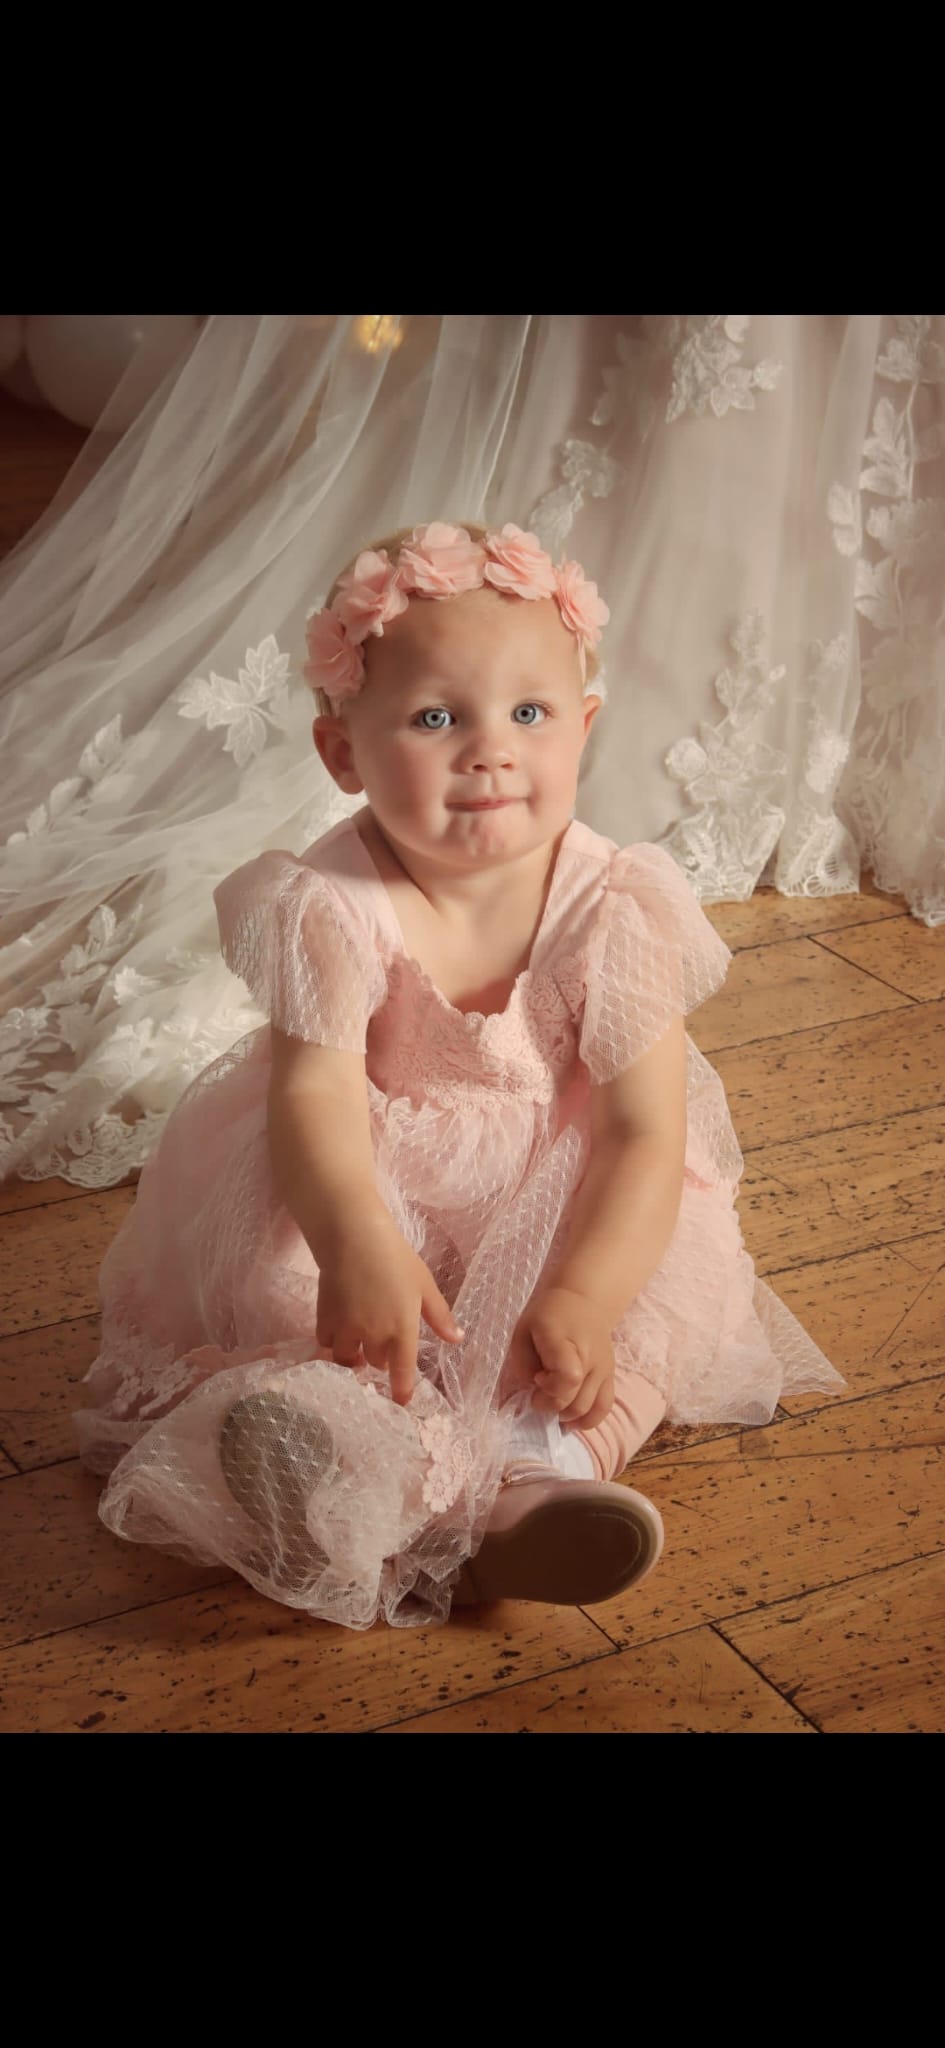 My granddaughter was a Flower Girl at her uncle’s wedding, she is sitting on the floor in a gorgeous pale pink dress, whilst sporting  a rather mischievous look on her pretty  face. The bride’s lace train  is the backdrop to the image.